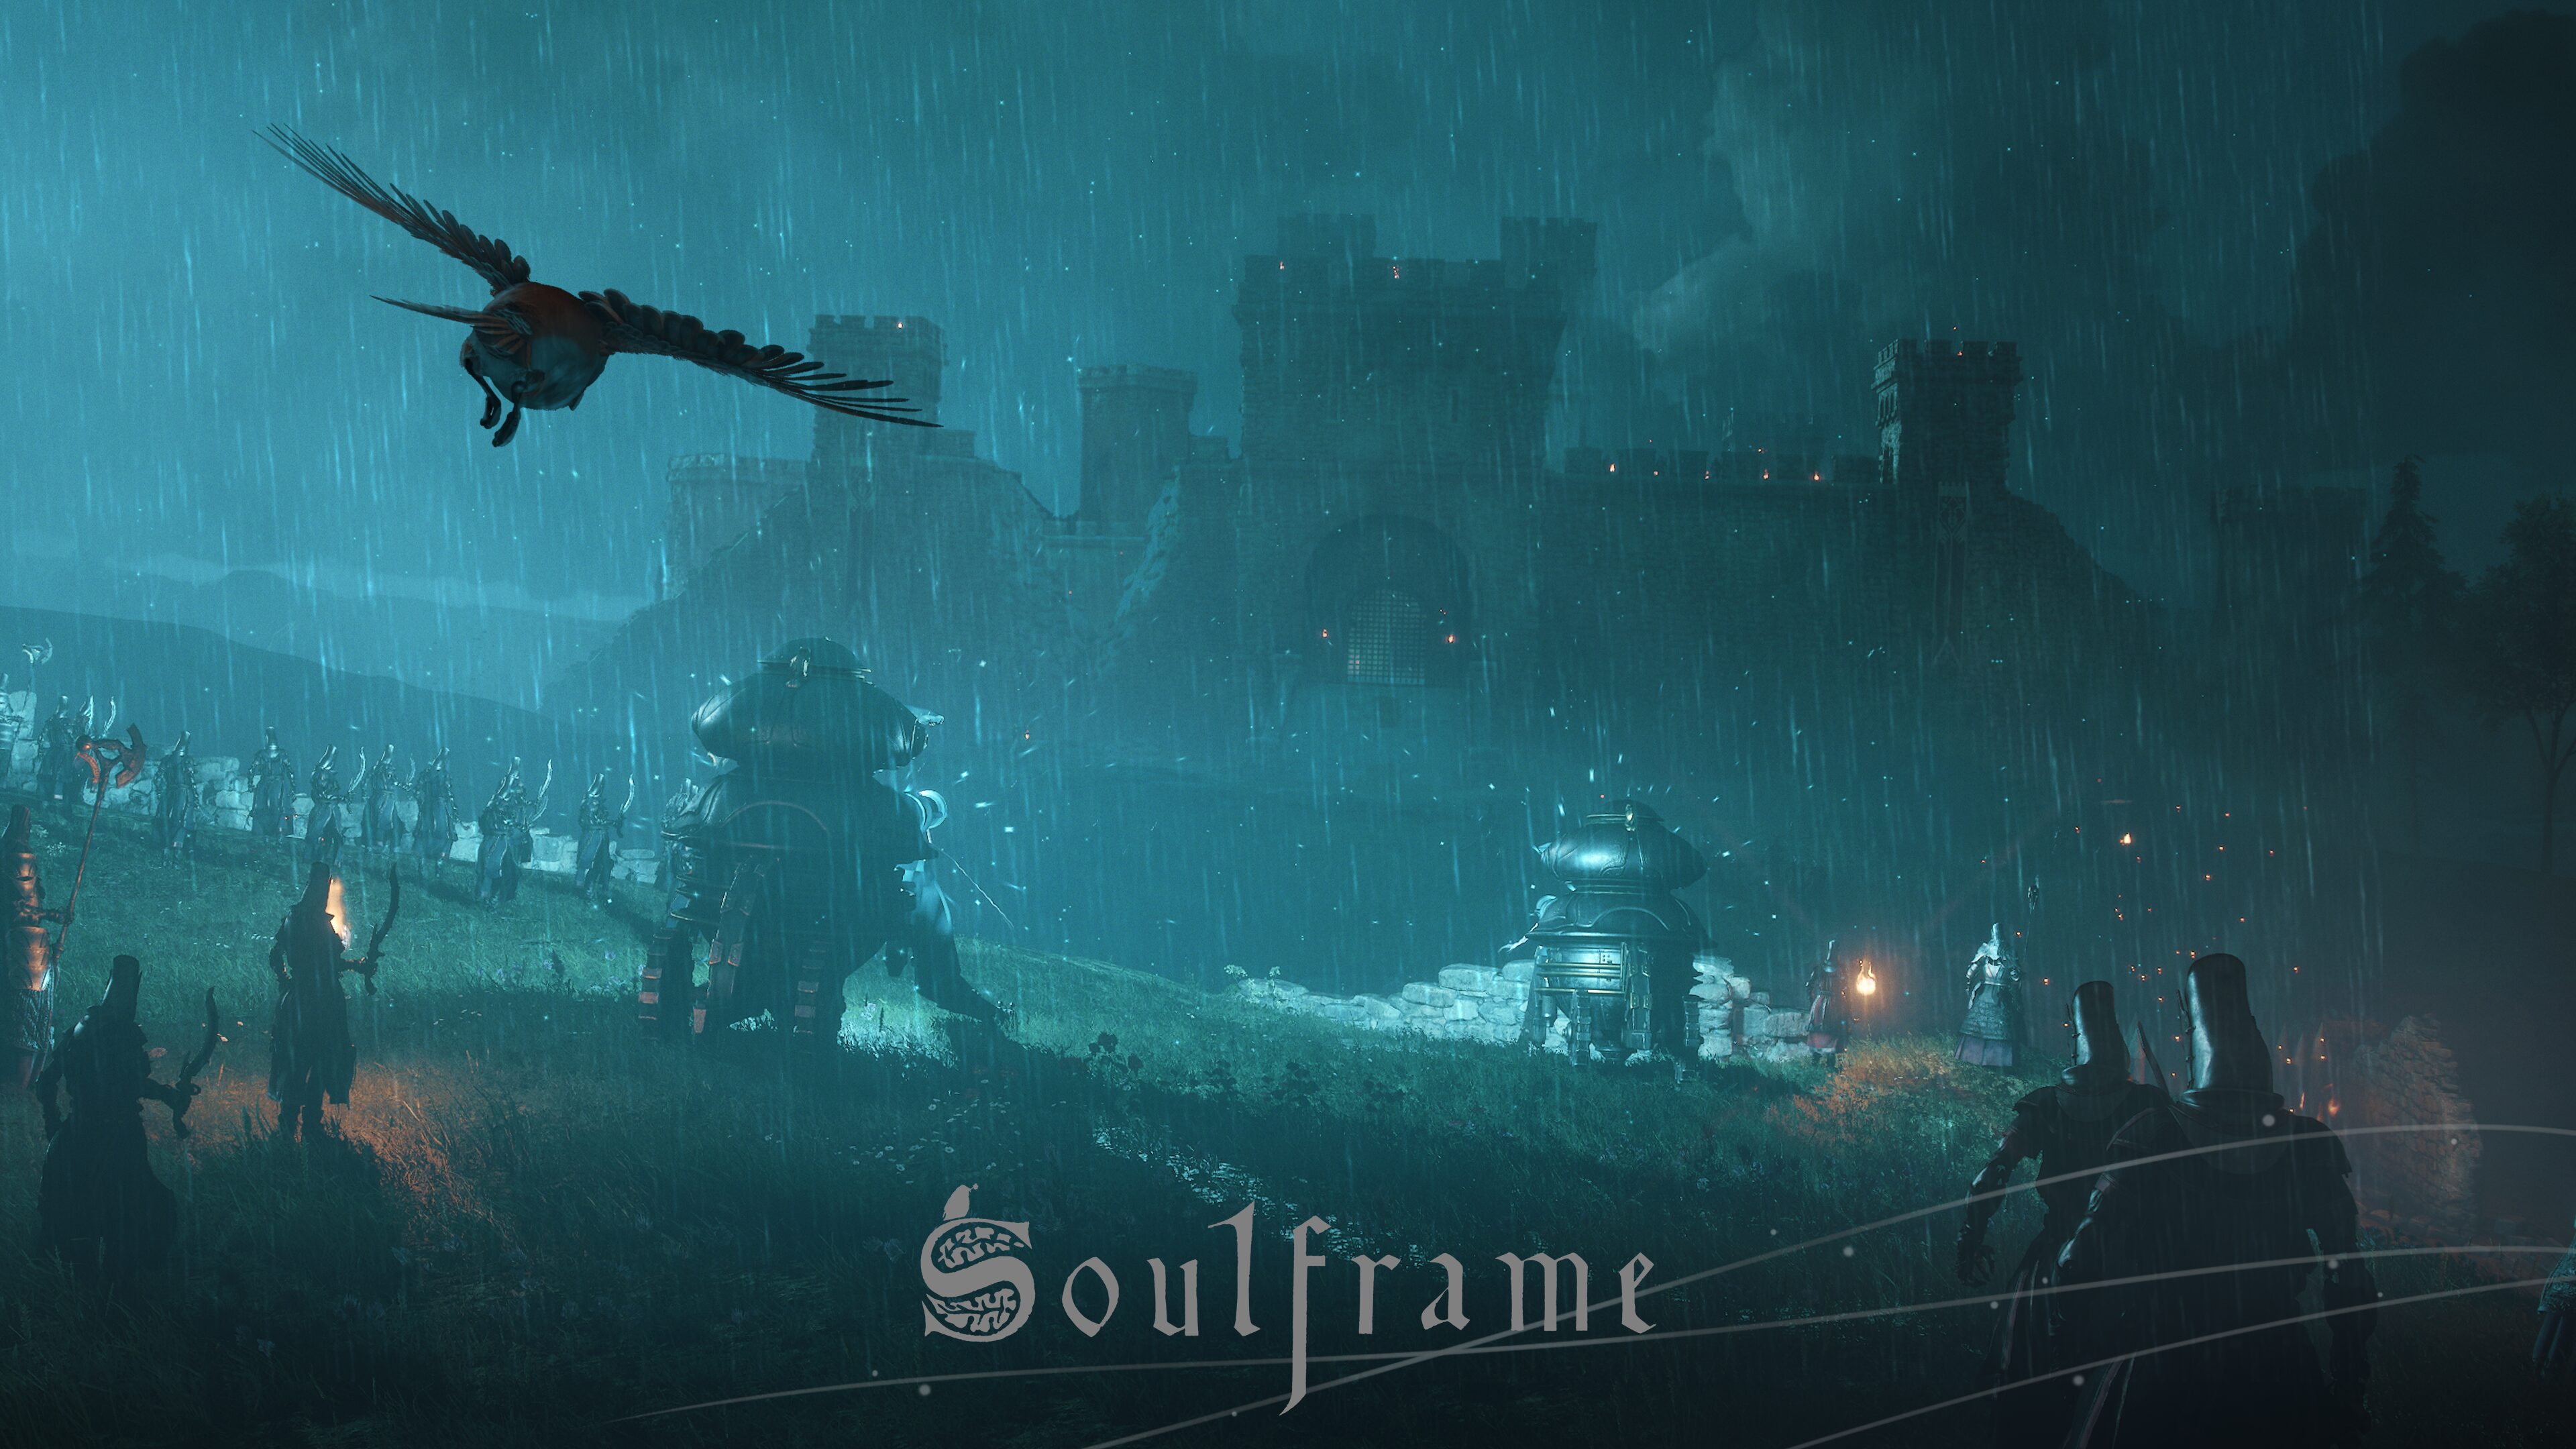 New Screenshots and Play Videos from Sulframe